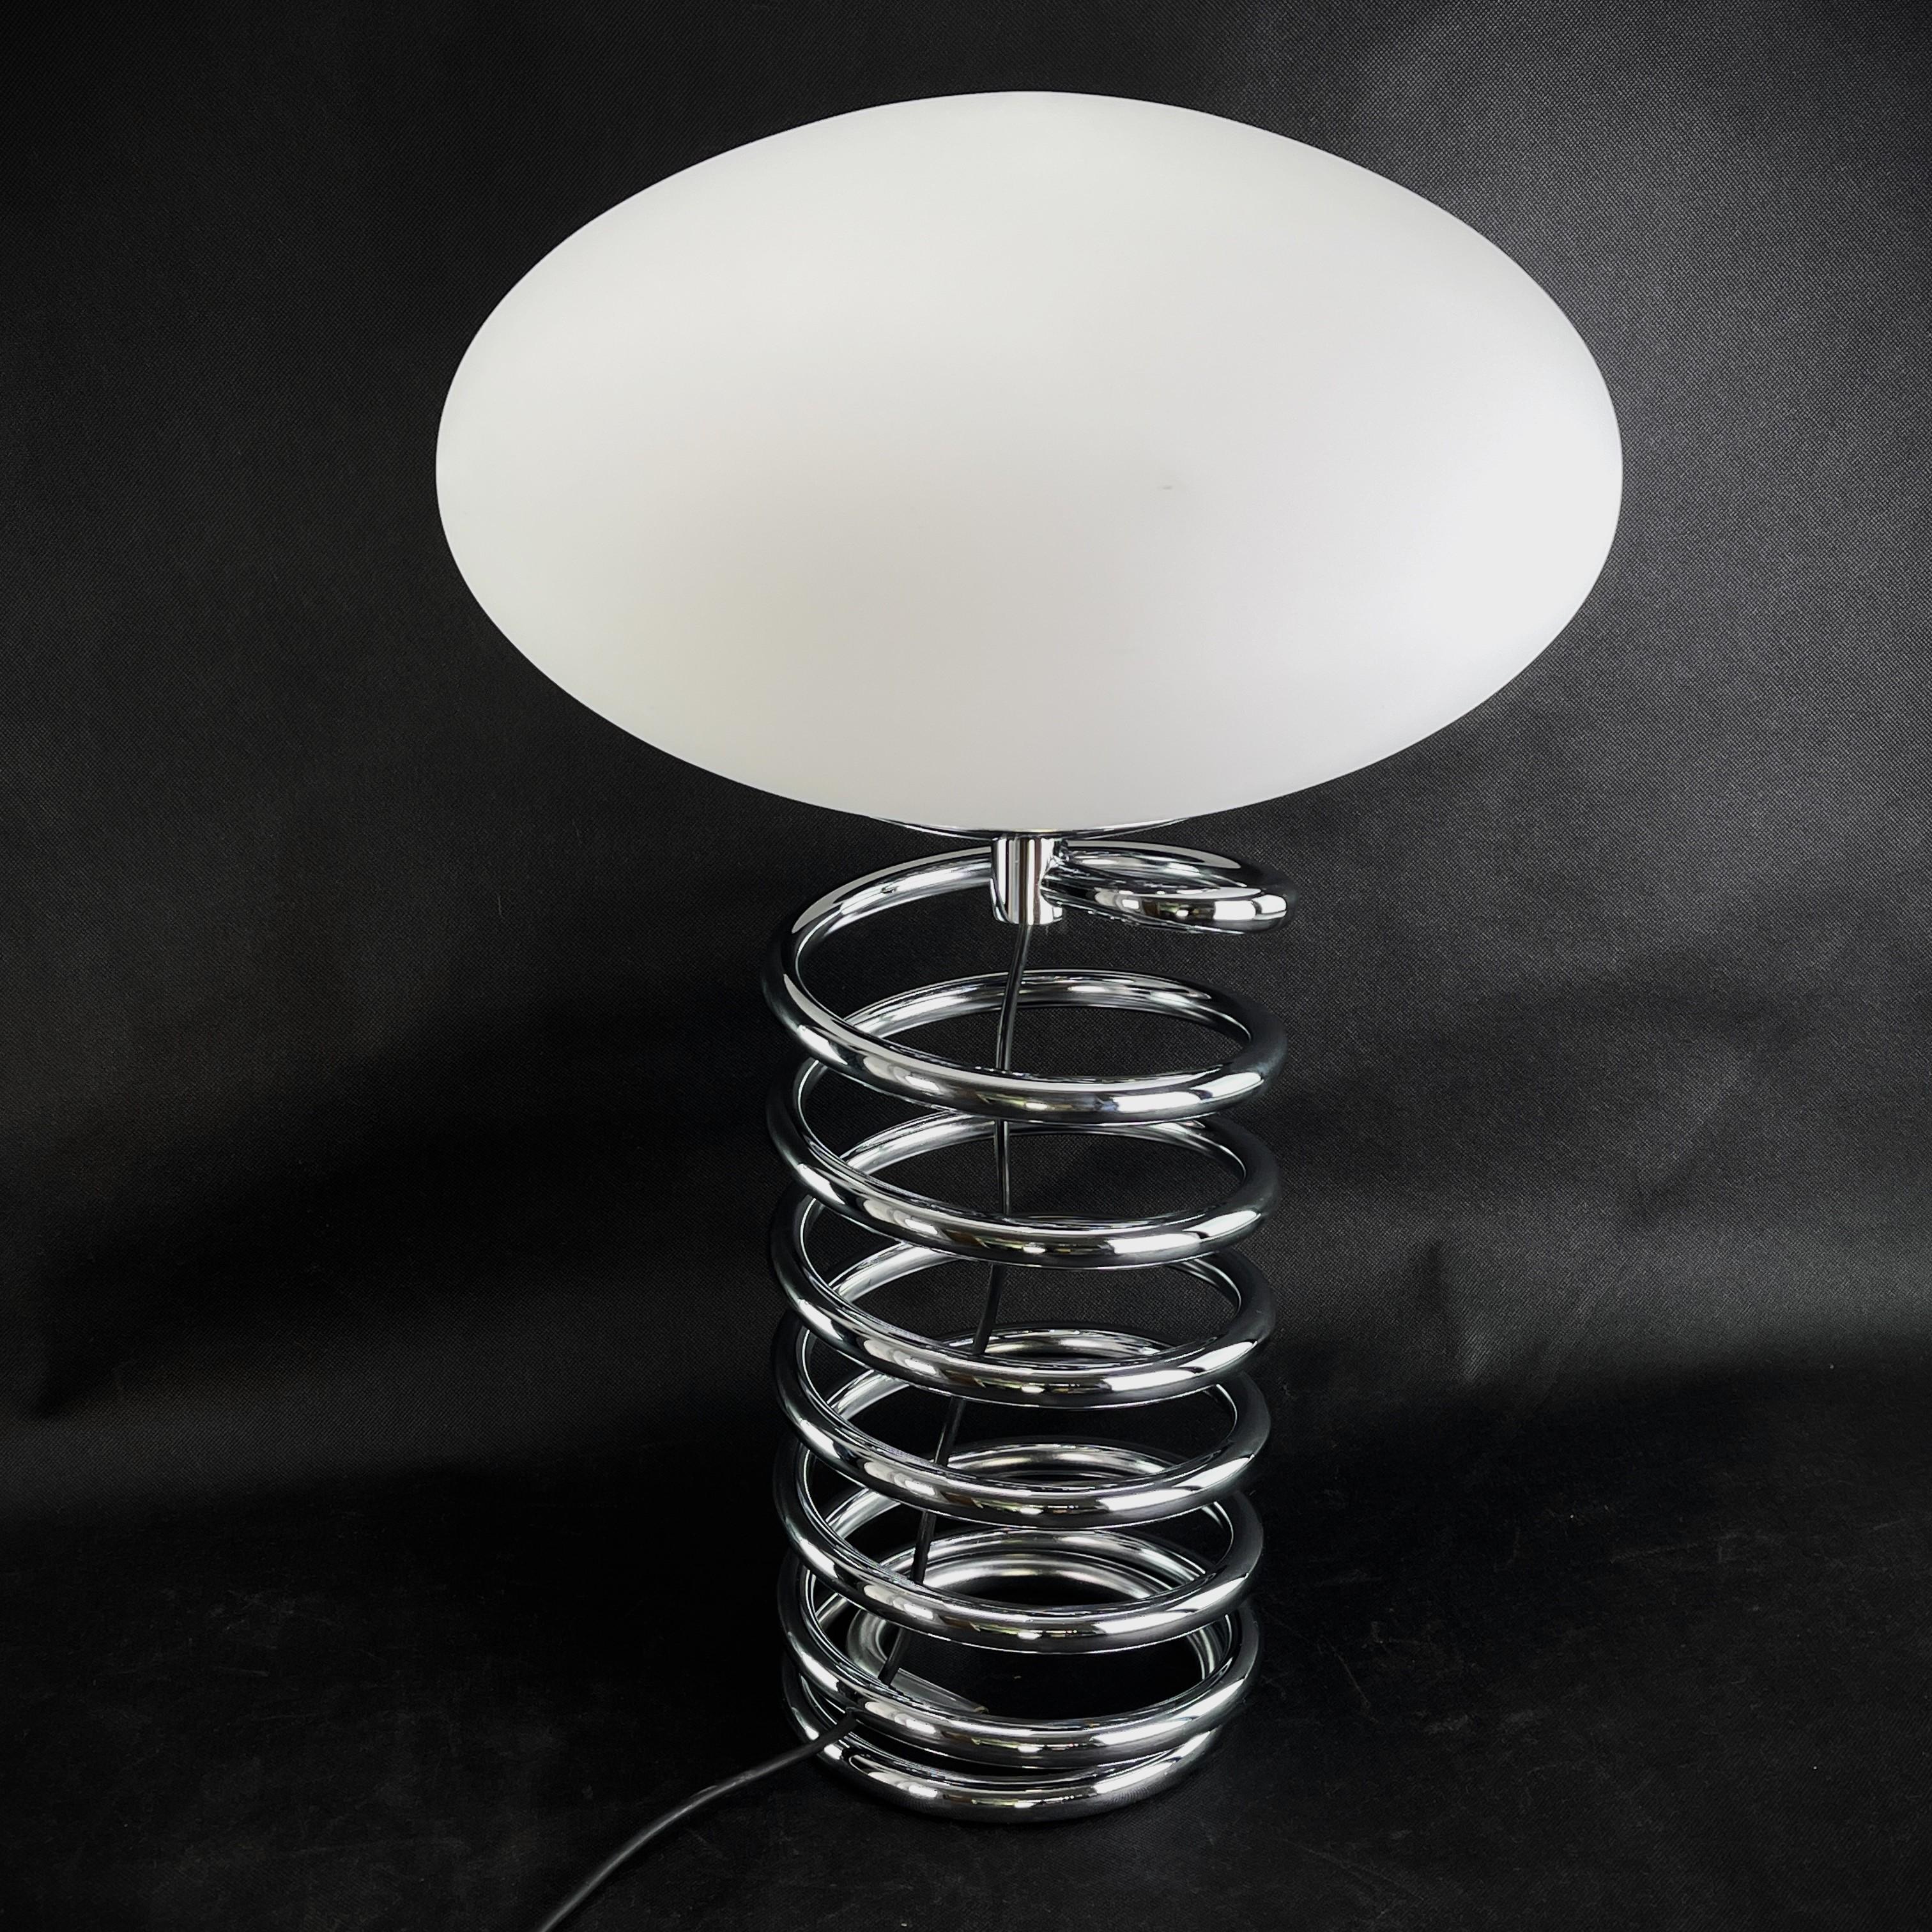 Floor and Table Lamp by Ingo Maurer - 1970s

The rare spiral lamp is a real design classic from the 70s. The lounge lamp by Ingo Maurer gives a pleasant light. The table lamp is rarely found in this condition.

The cleaned item has 1 x E27 socket